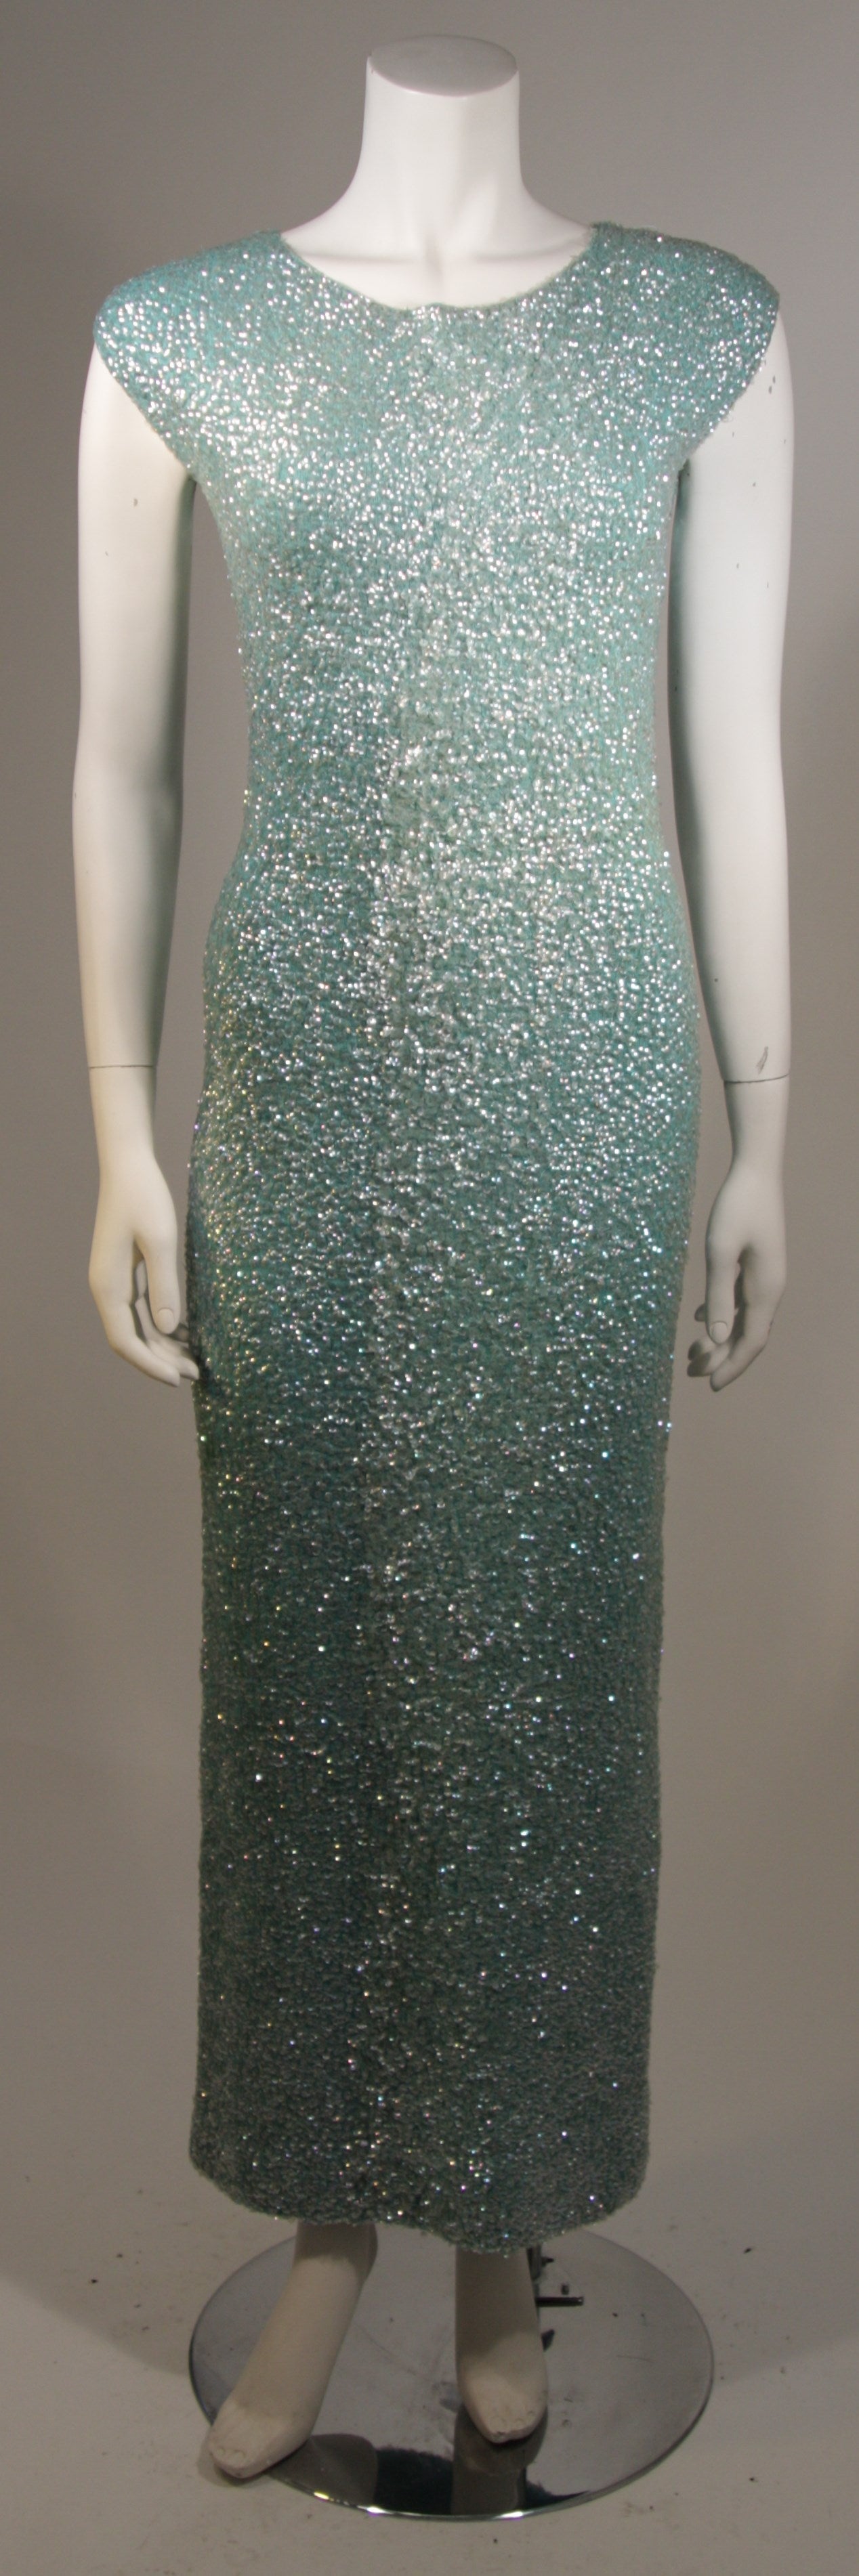 This fabulous gown is available for viewing at our Beverly Hills Boutique. The gown is composed of an aqua hued stretch knit adorned with iridescent sequins. There is a center back zipper for ease of access. A great color for spring and